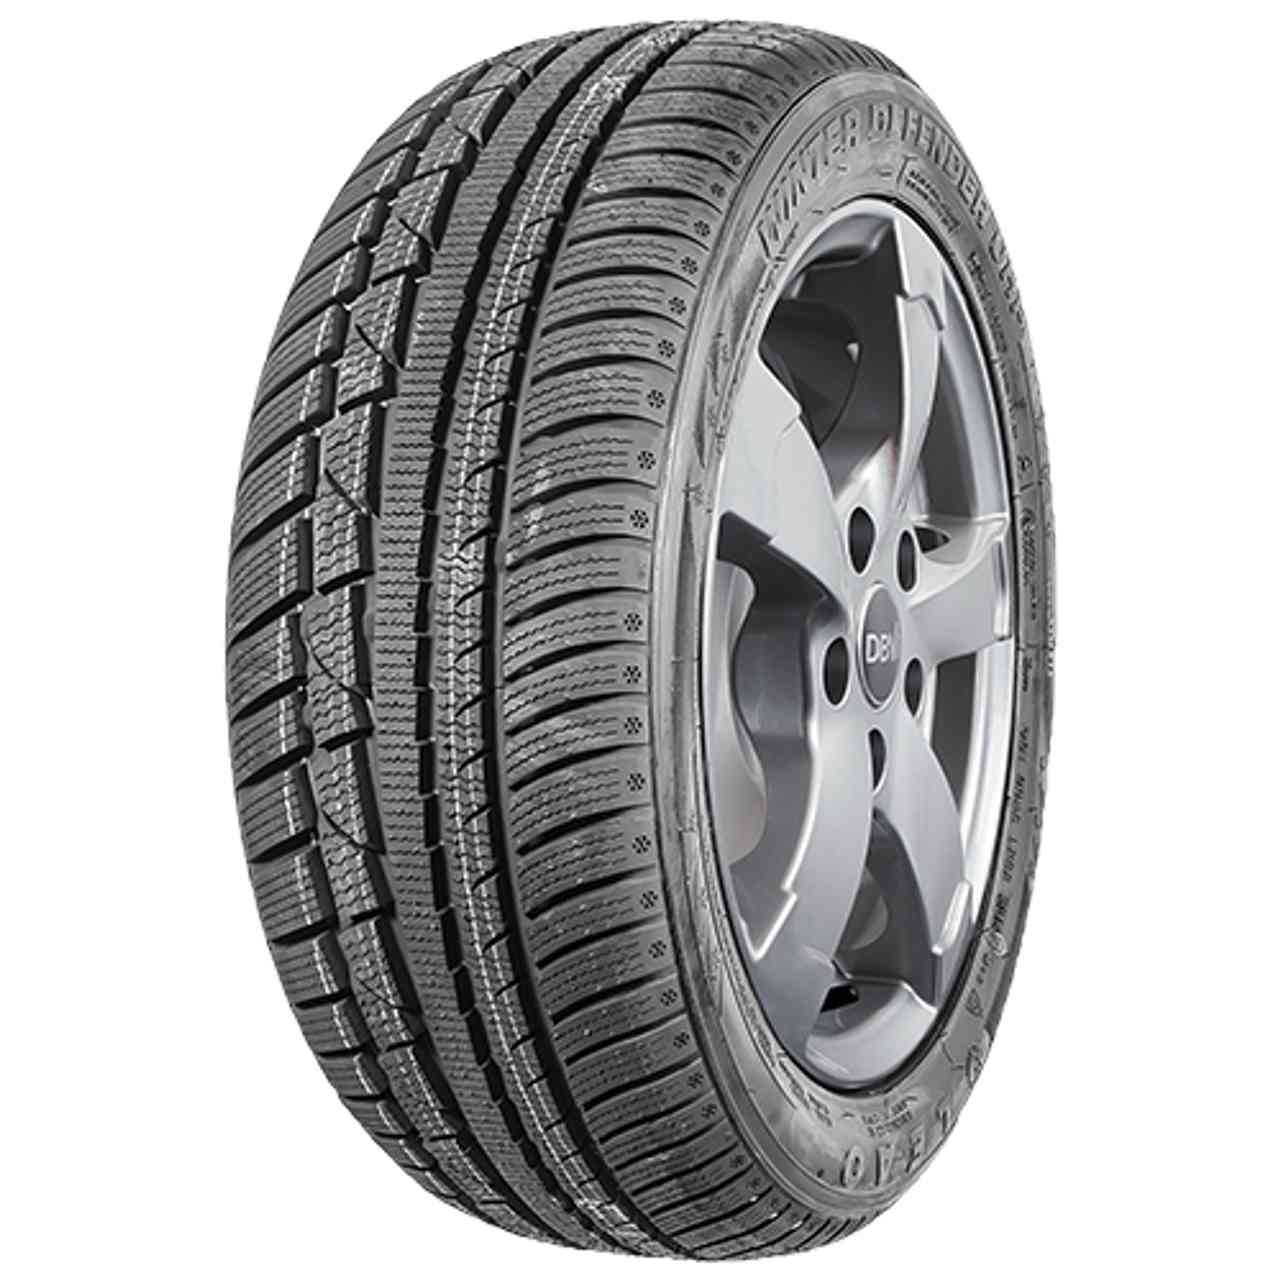 LEAO WINTER DEFENDER UHP 255/35R20 97V BSW XL